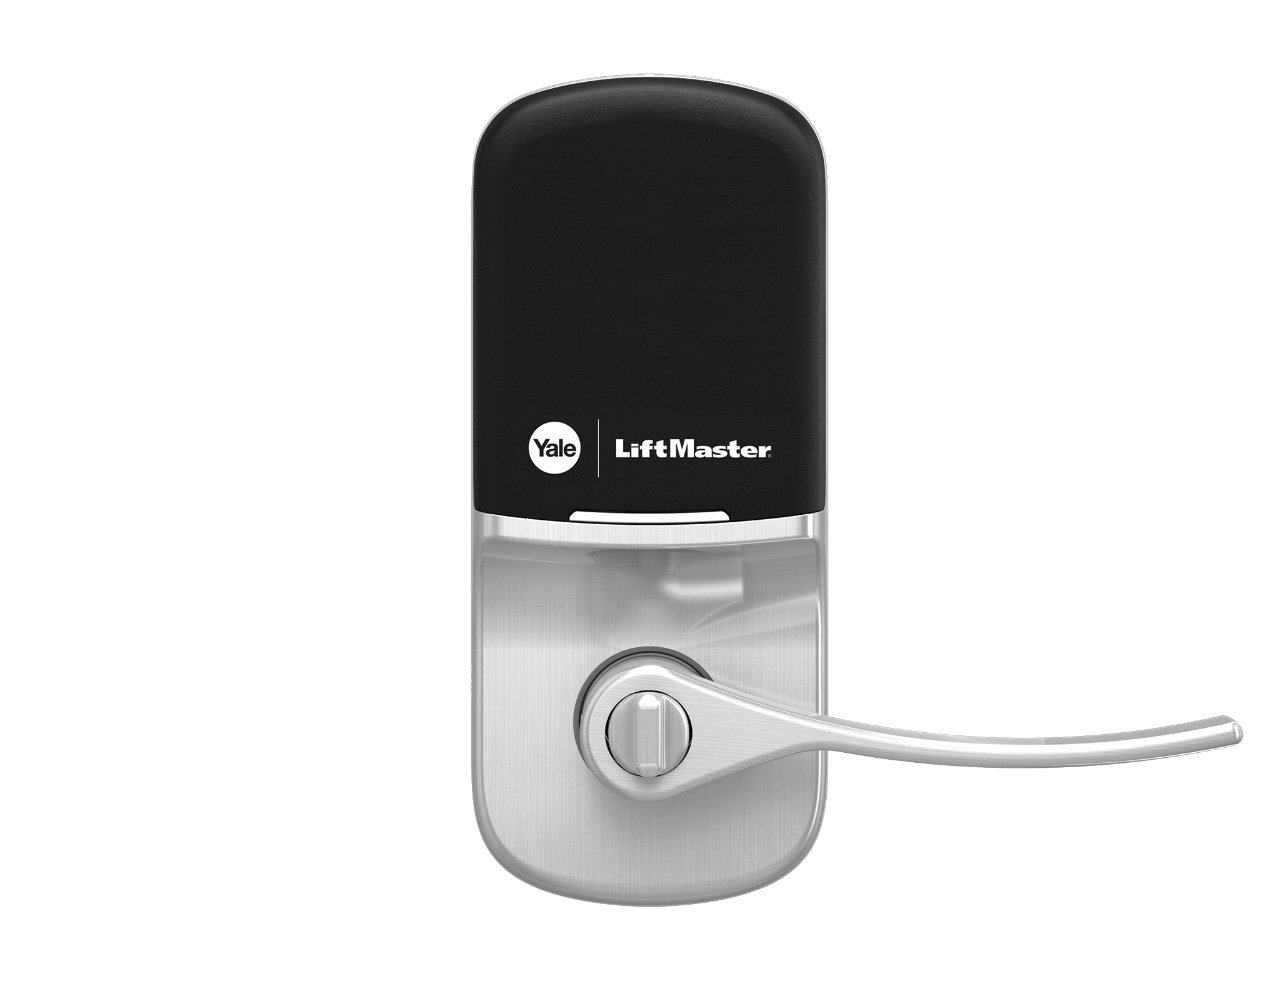 Scale the number of entry points you can monitor and control with LiftMaster’s lineup of smart locks.